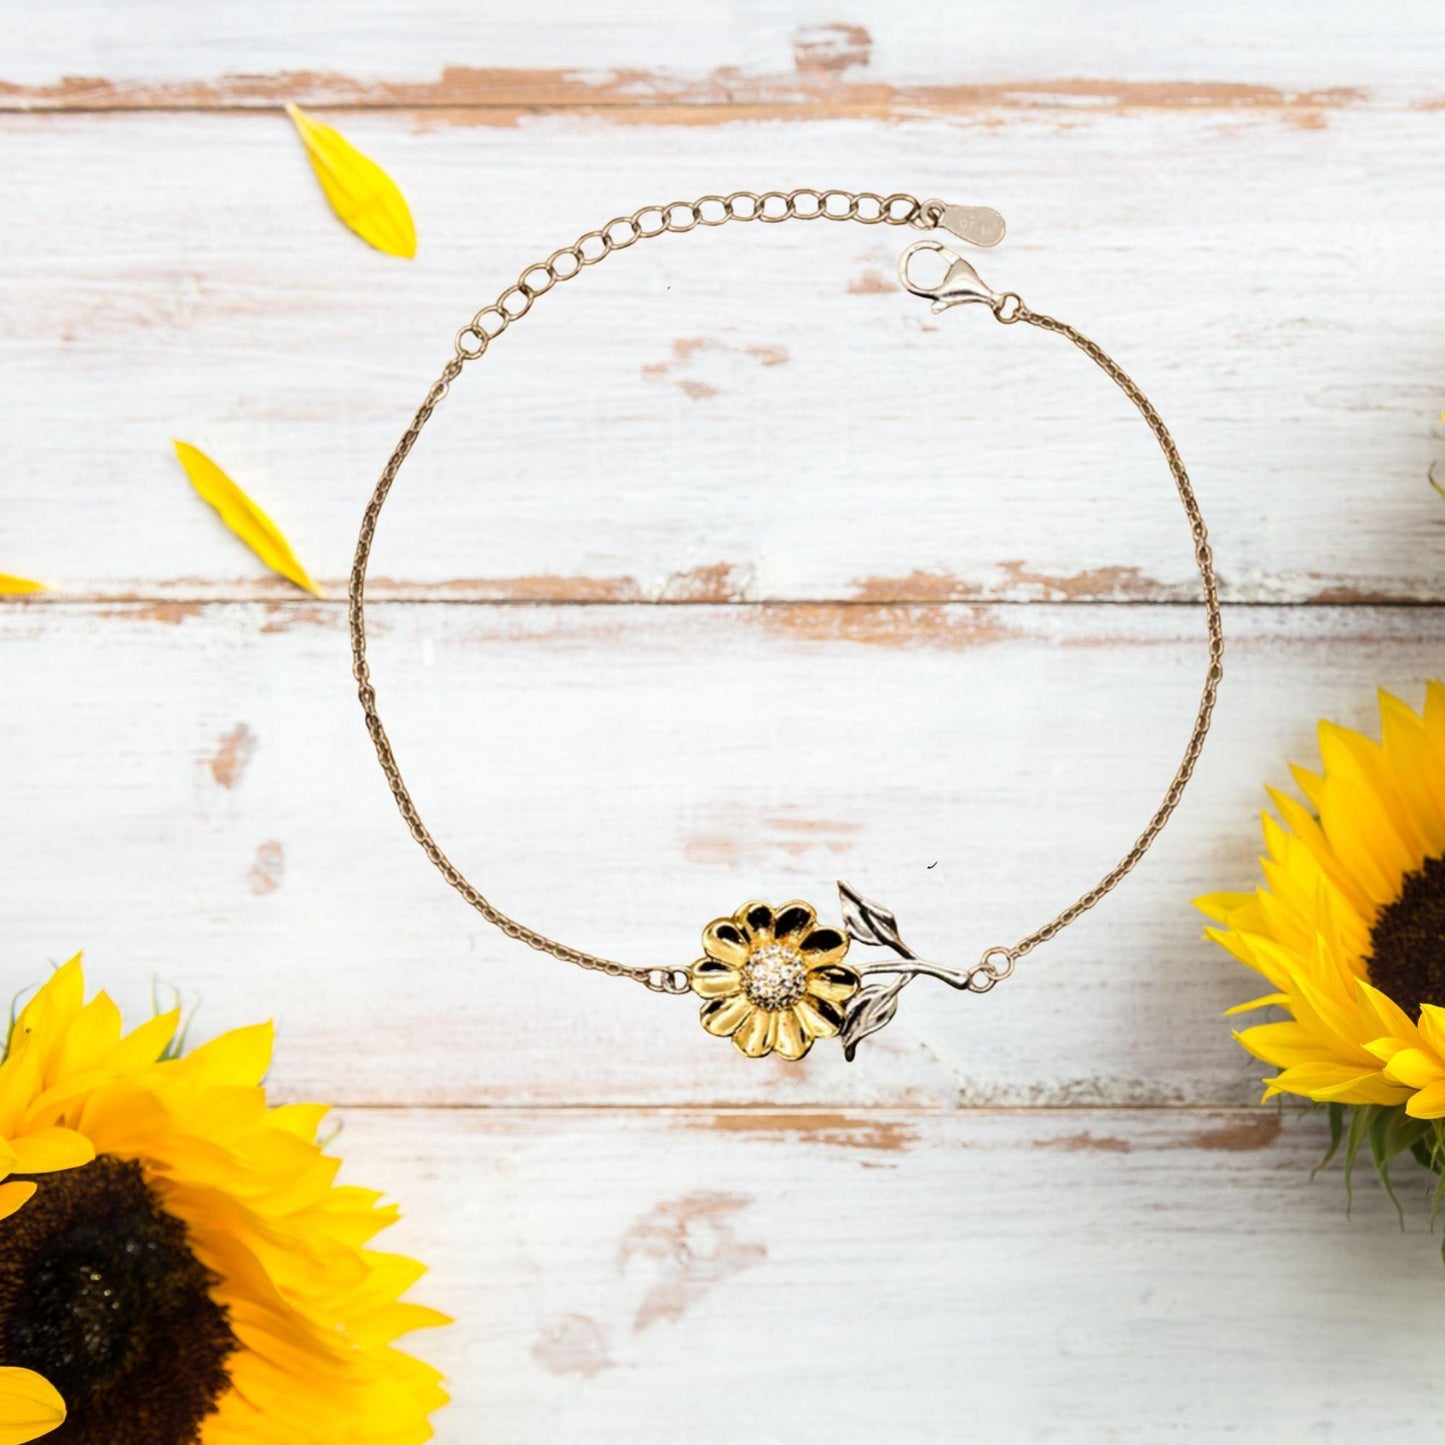 Remarkable Insurance Adjuster Gifts, Your dedication and hard work, Inspirational Birthday Christmas Unique Sunflower Bracelet For Insurance Adjuster, Coworkers, Men, Women, Friends - Mallard Moon Gift Shop